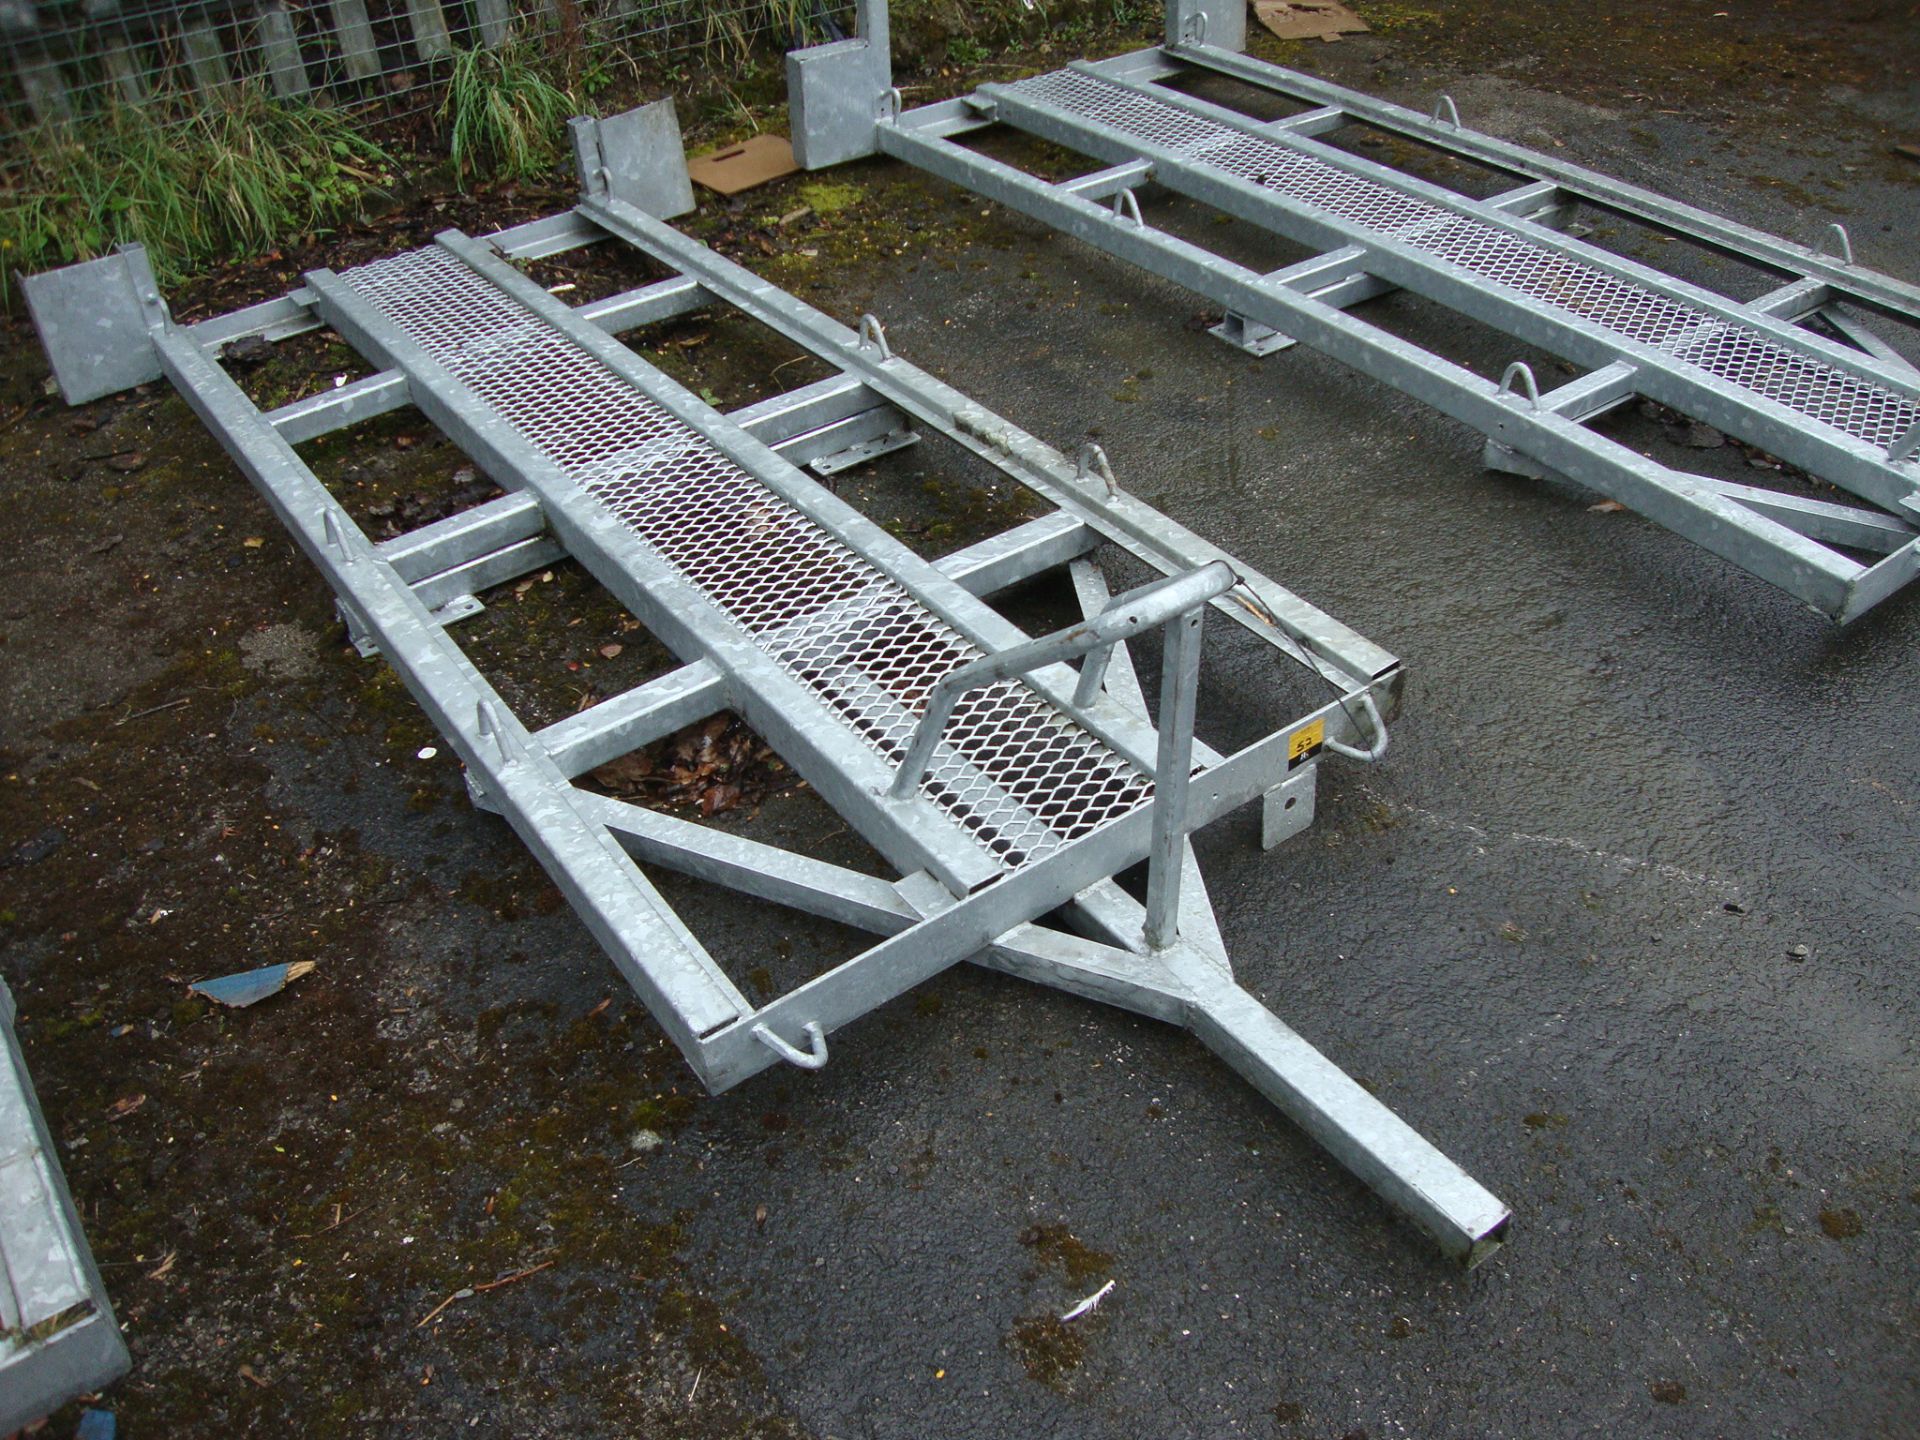 Small trailer chassis/bed, possibly for use with motorbikes, main bed dimensions being 211cm (l) x